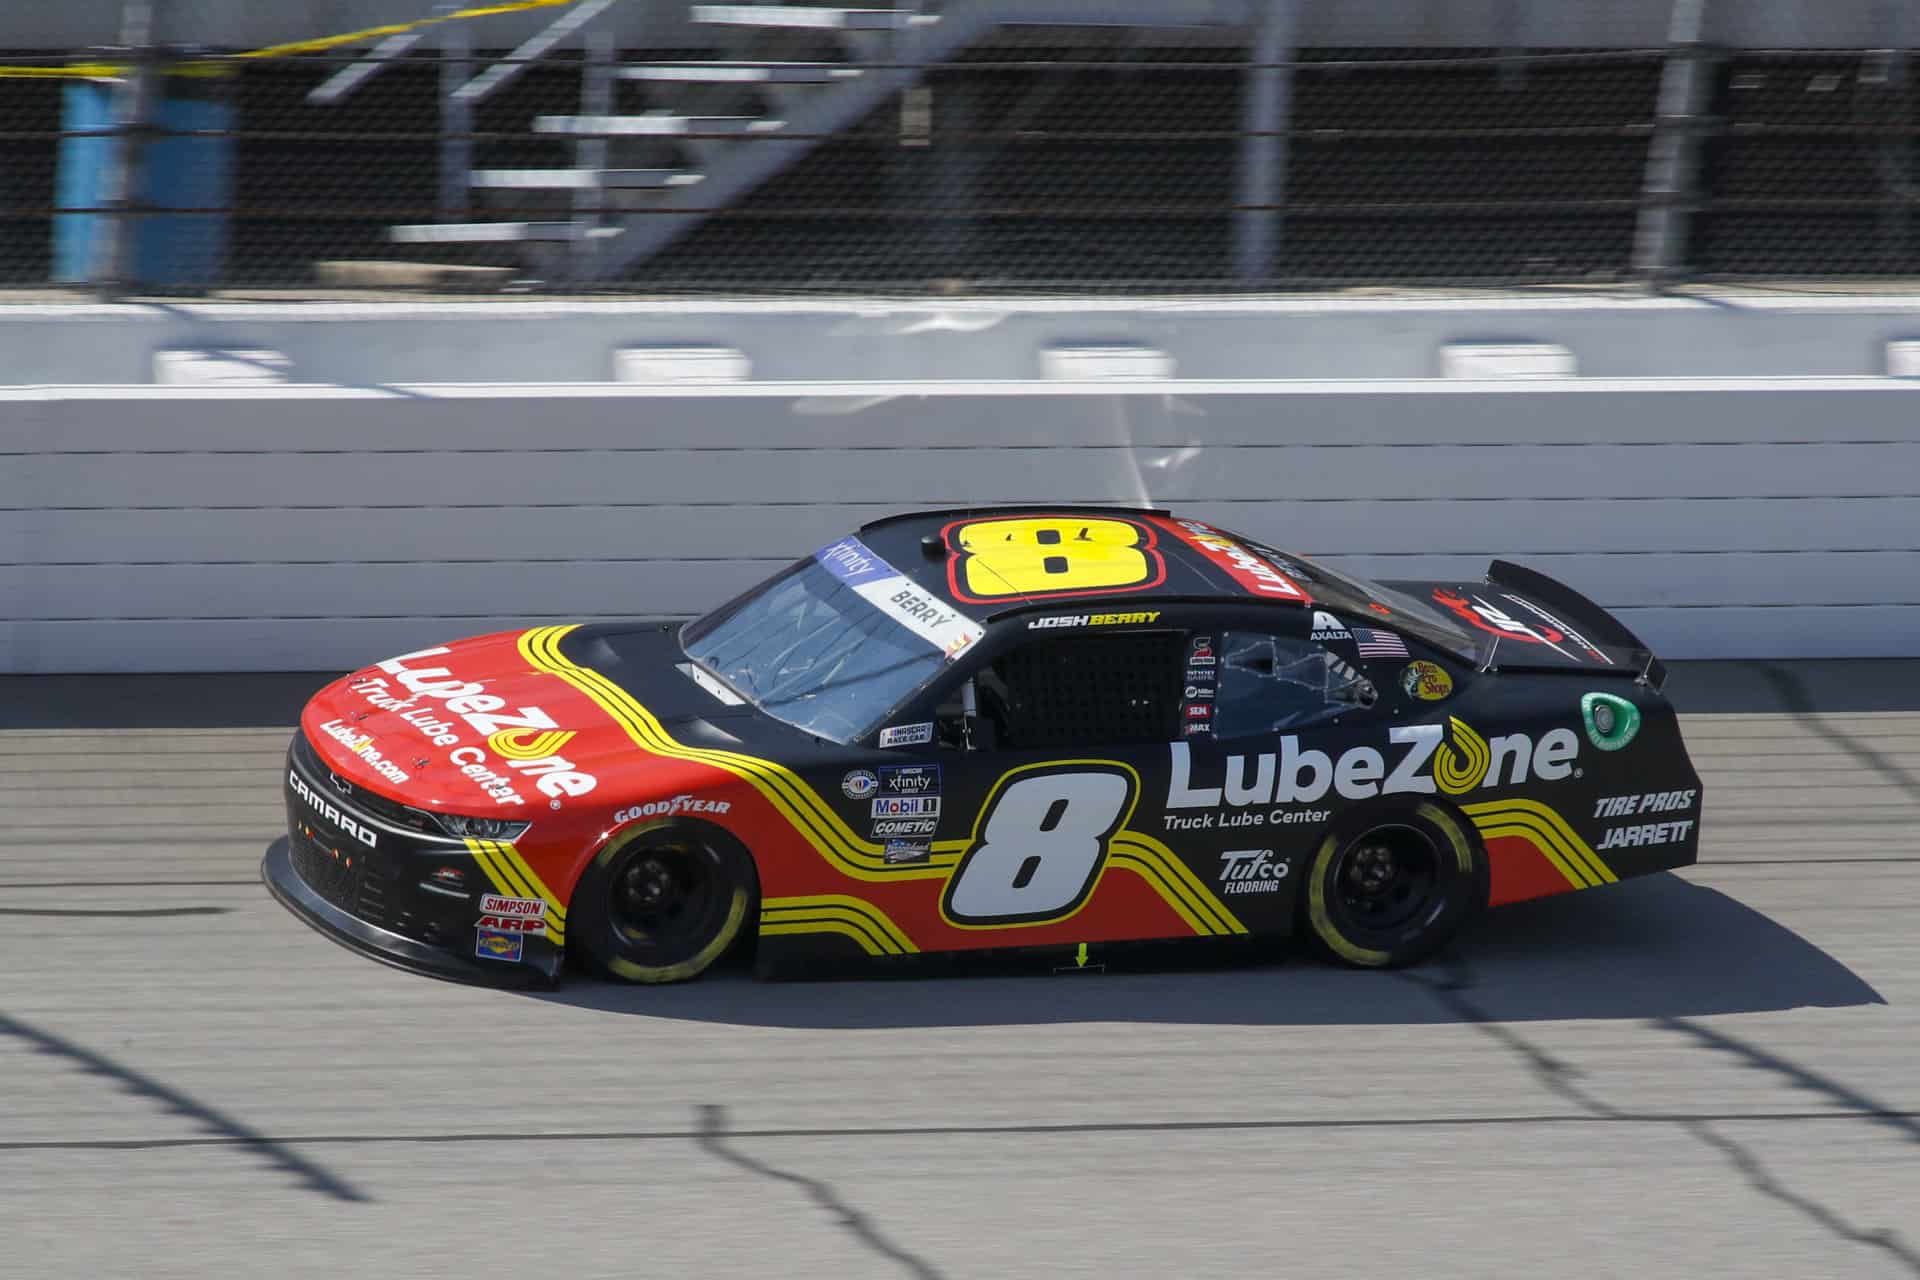 JR Motorsports' Josh Berry was disappointed after a runner-up finish in the NASCAR Xfinity Series at Michigan International Speedway.